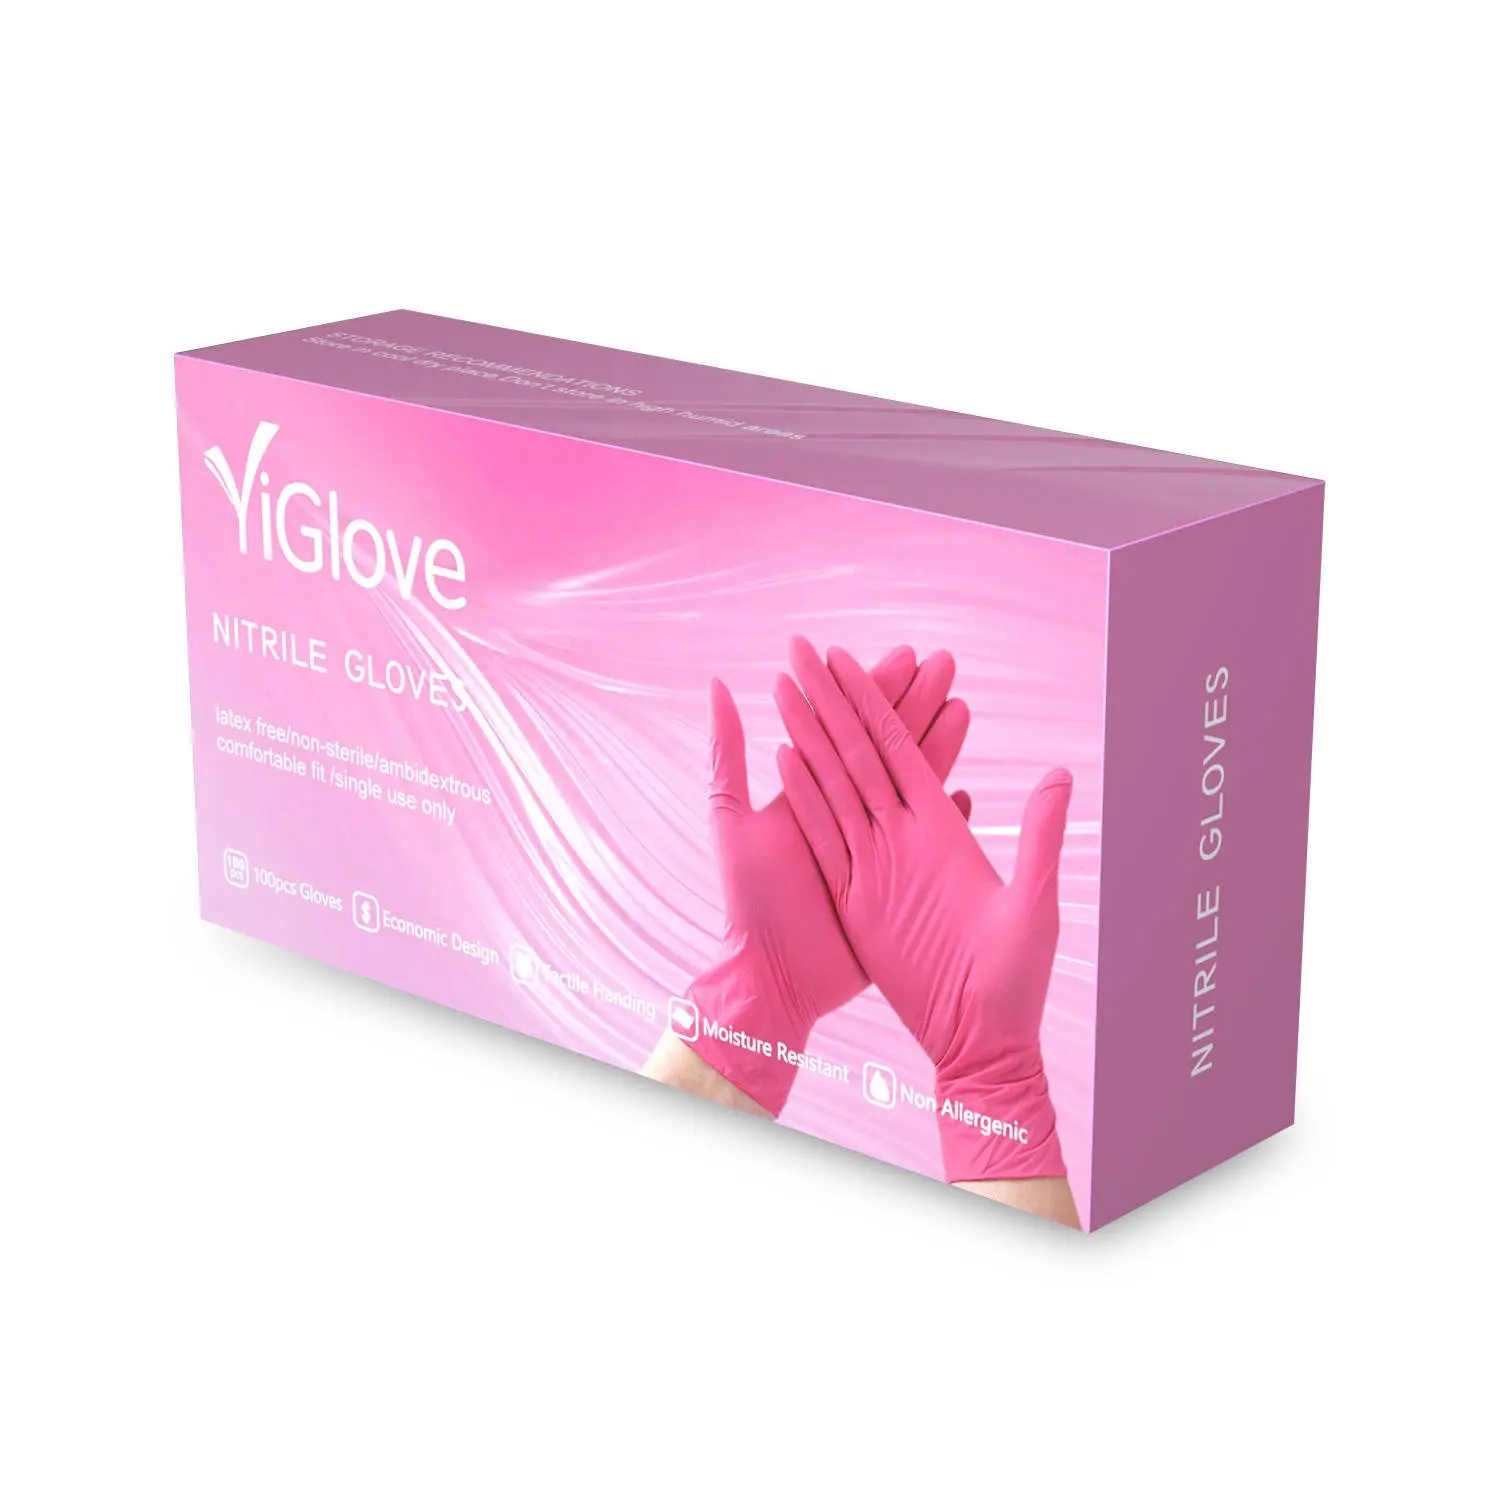 Pink Nitrile Gloves 100pcs Xs Disposables Nitrilegloves For Household Cleaning / Gardening / Beauty Catering General